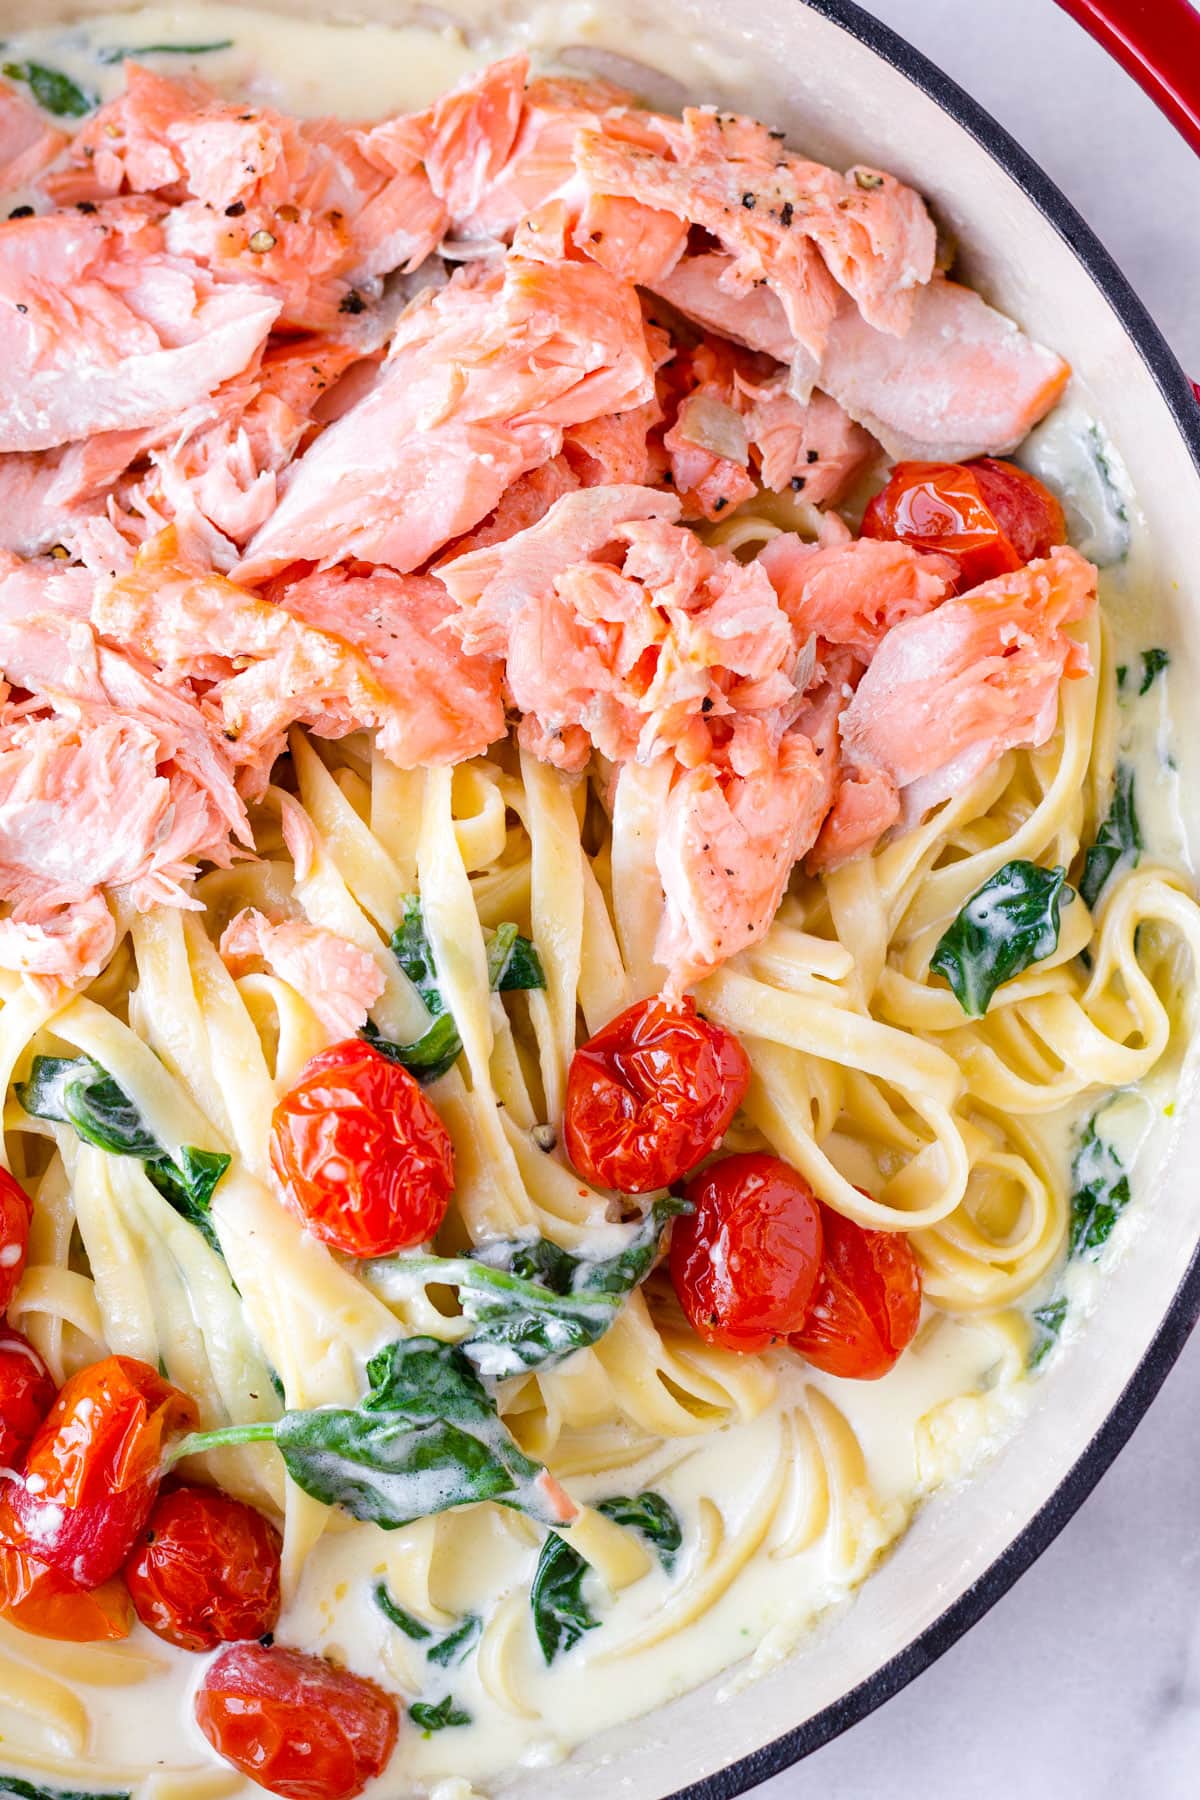 top view of fettuccine al dente, blistered tomatoes, spinach, and flaked salmon